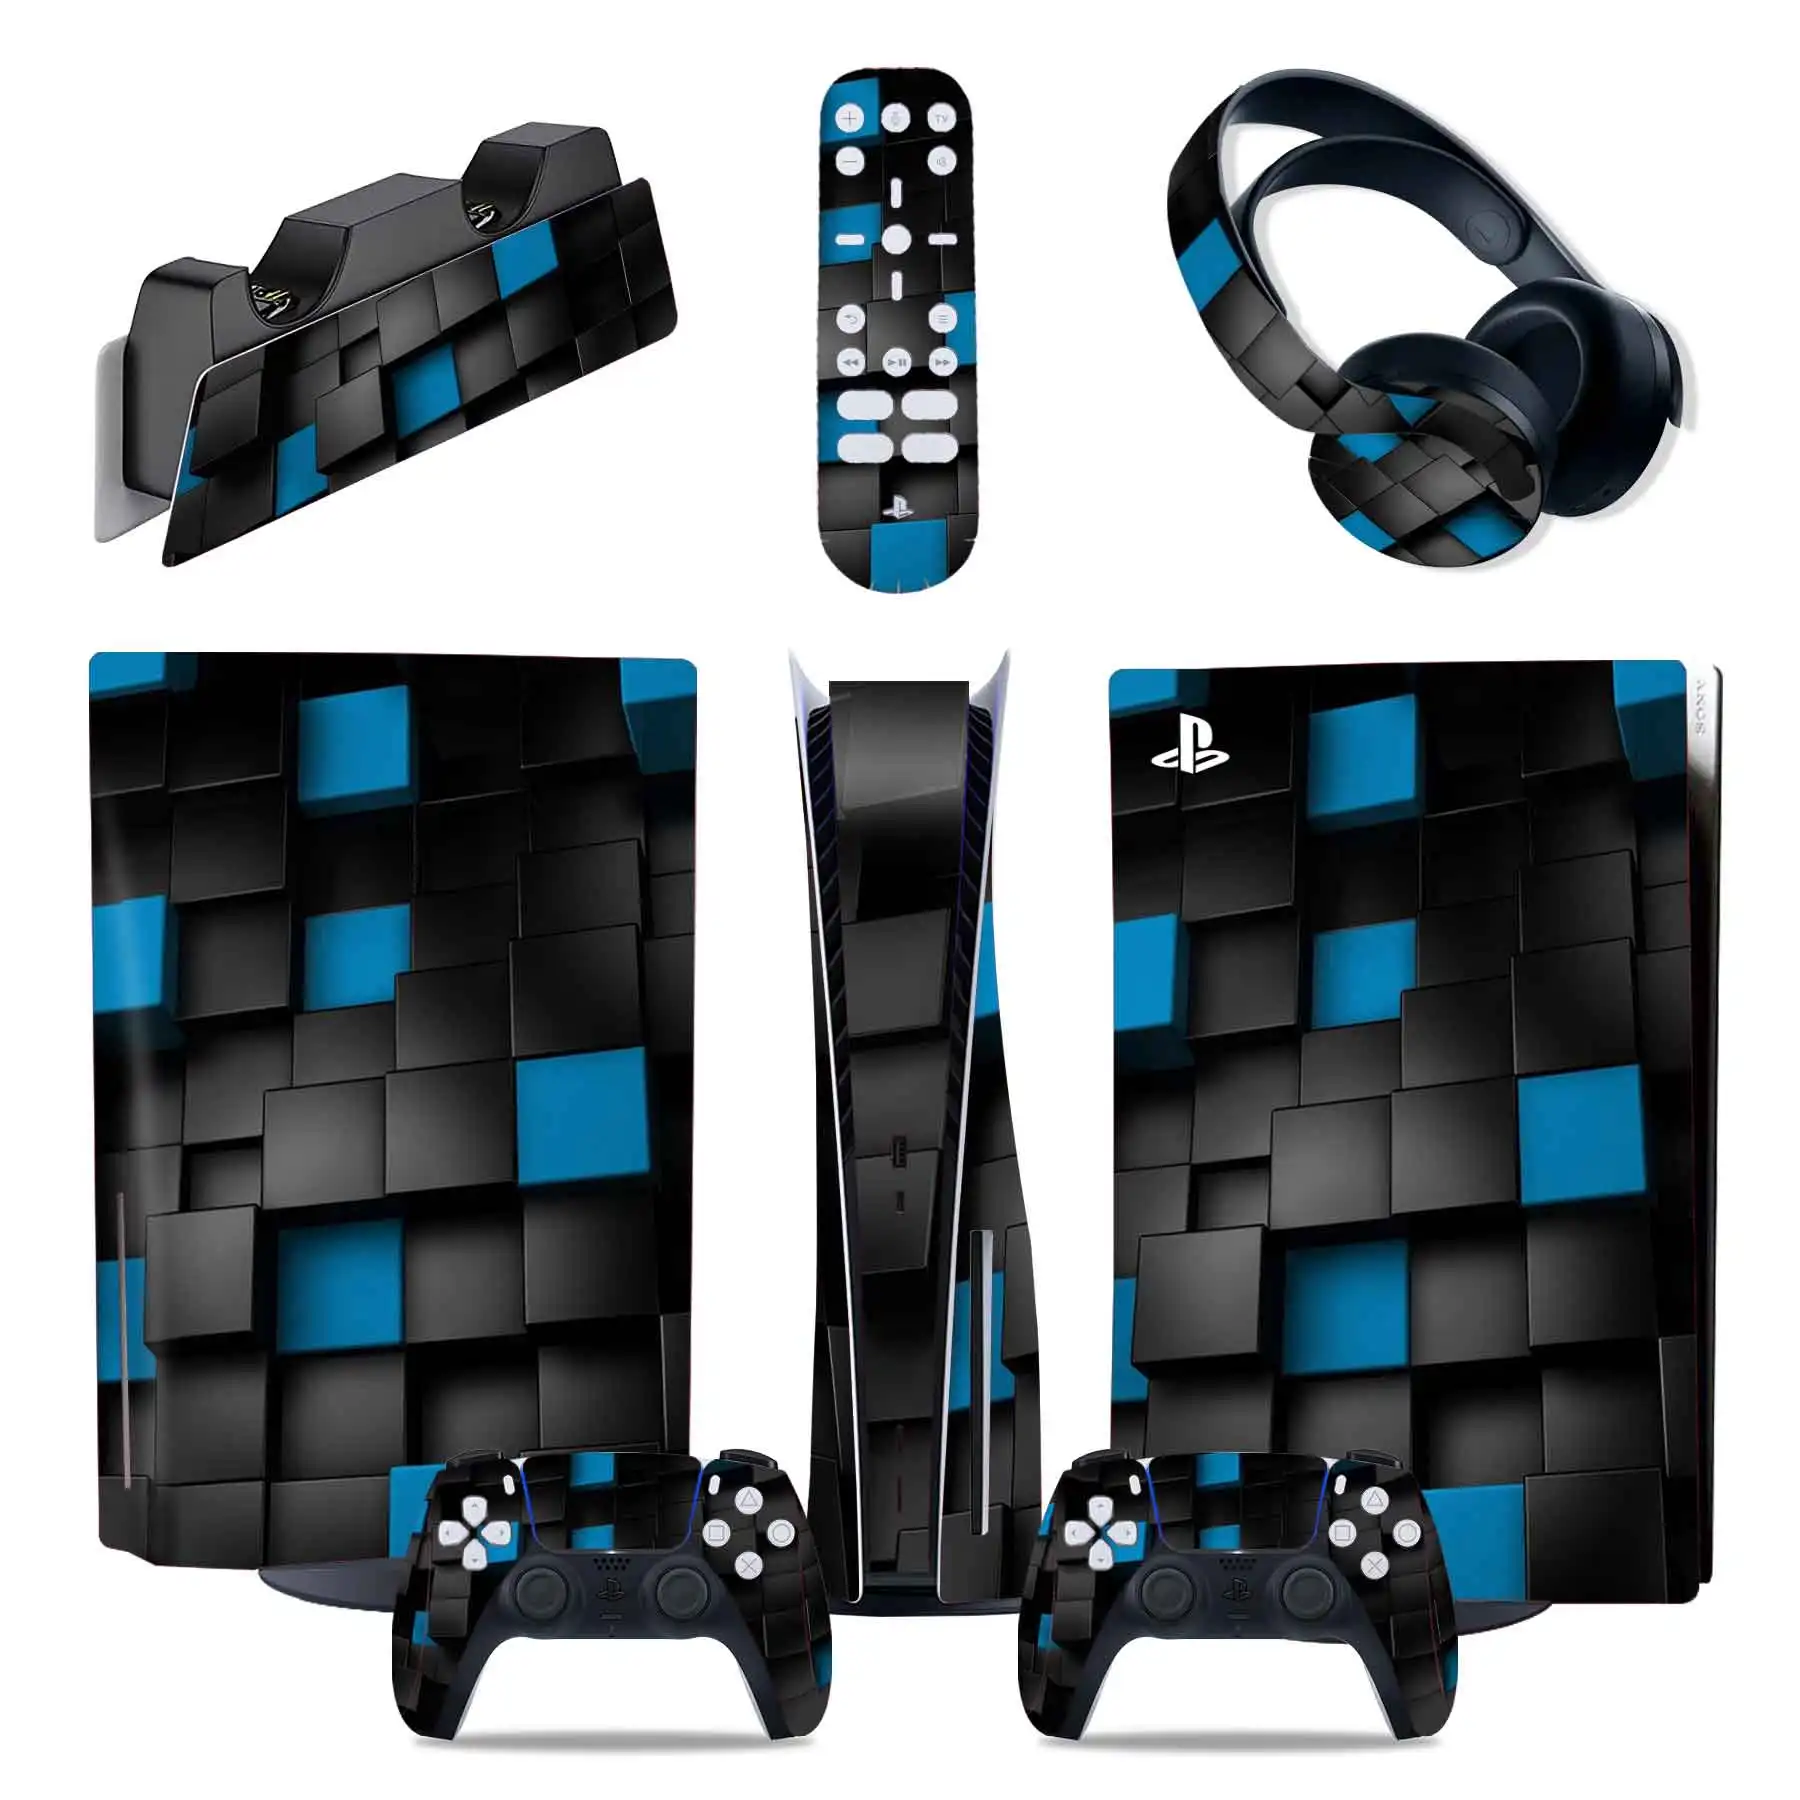 

PS5 Skin Sticker for Console and 2 Controllers Full Wrap Vinyl Decal Protective Cover Faceplate #0736